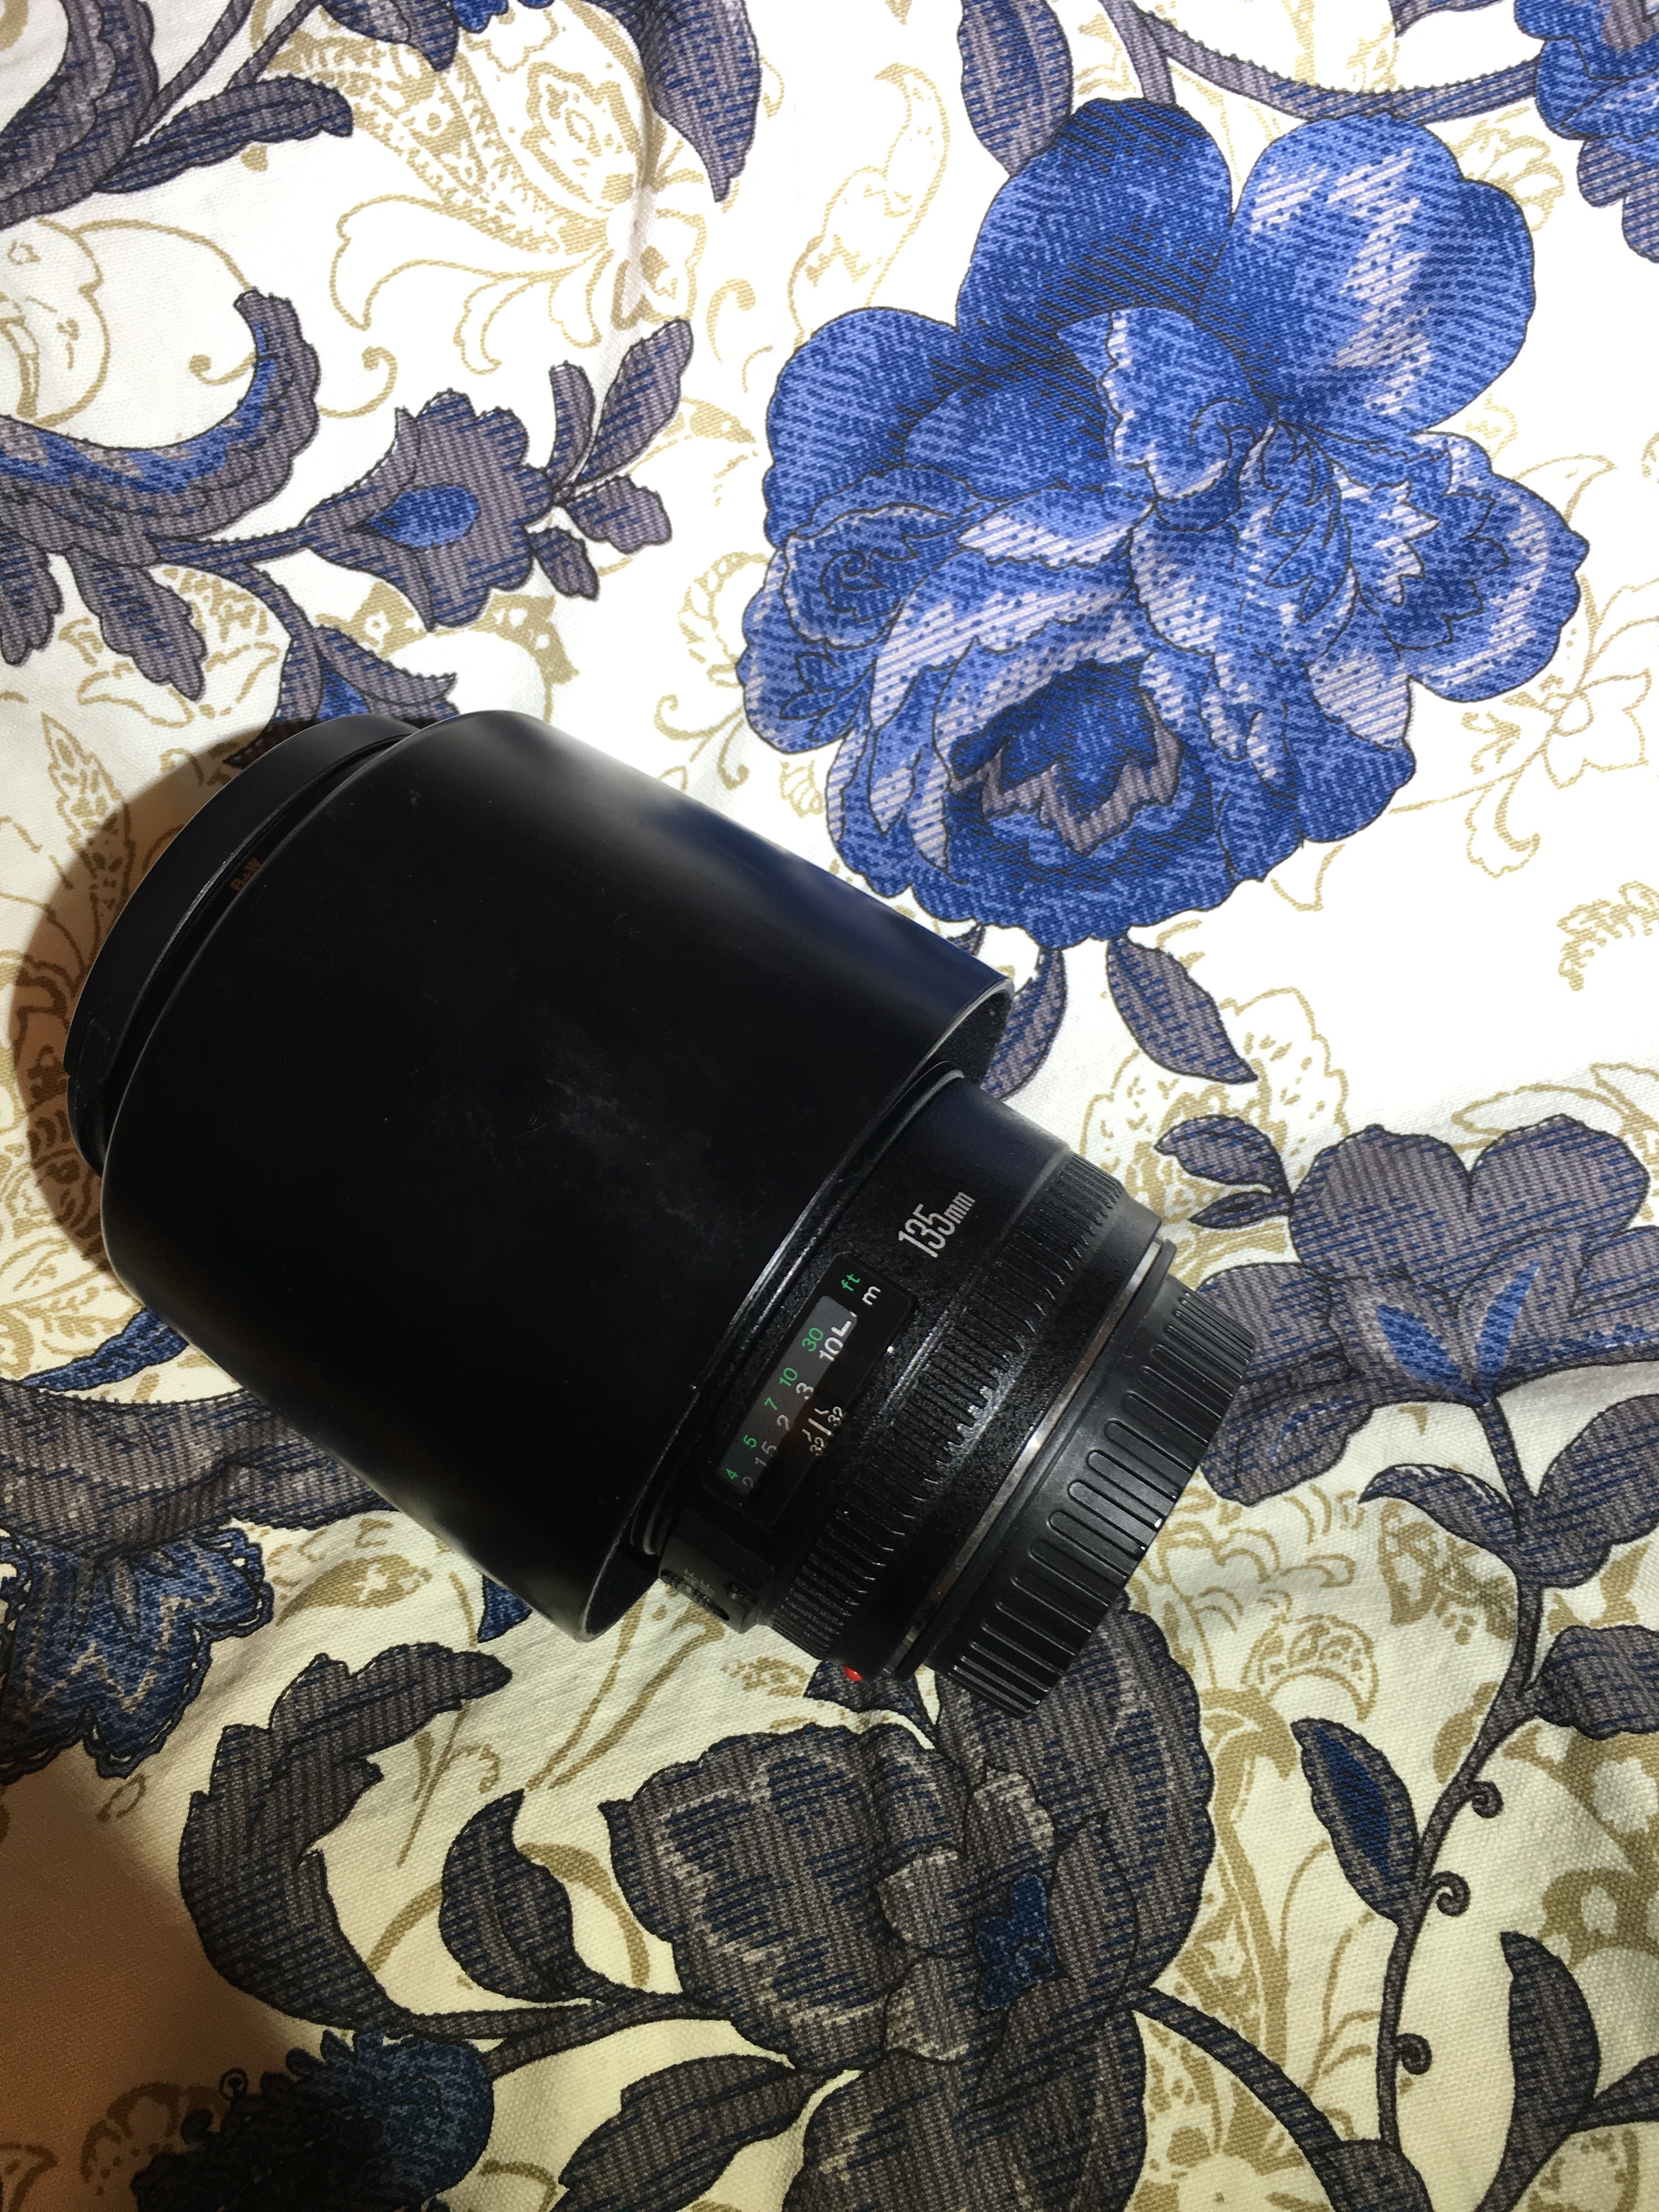  Canon EF 135mm f/2L USM, with B+W UV filter